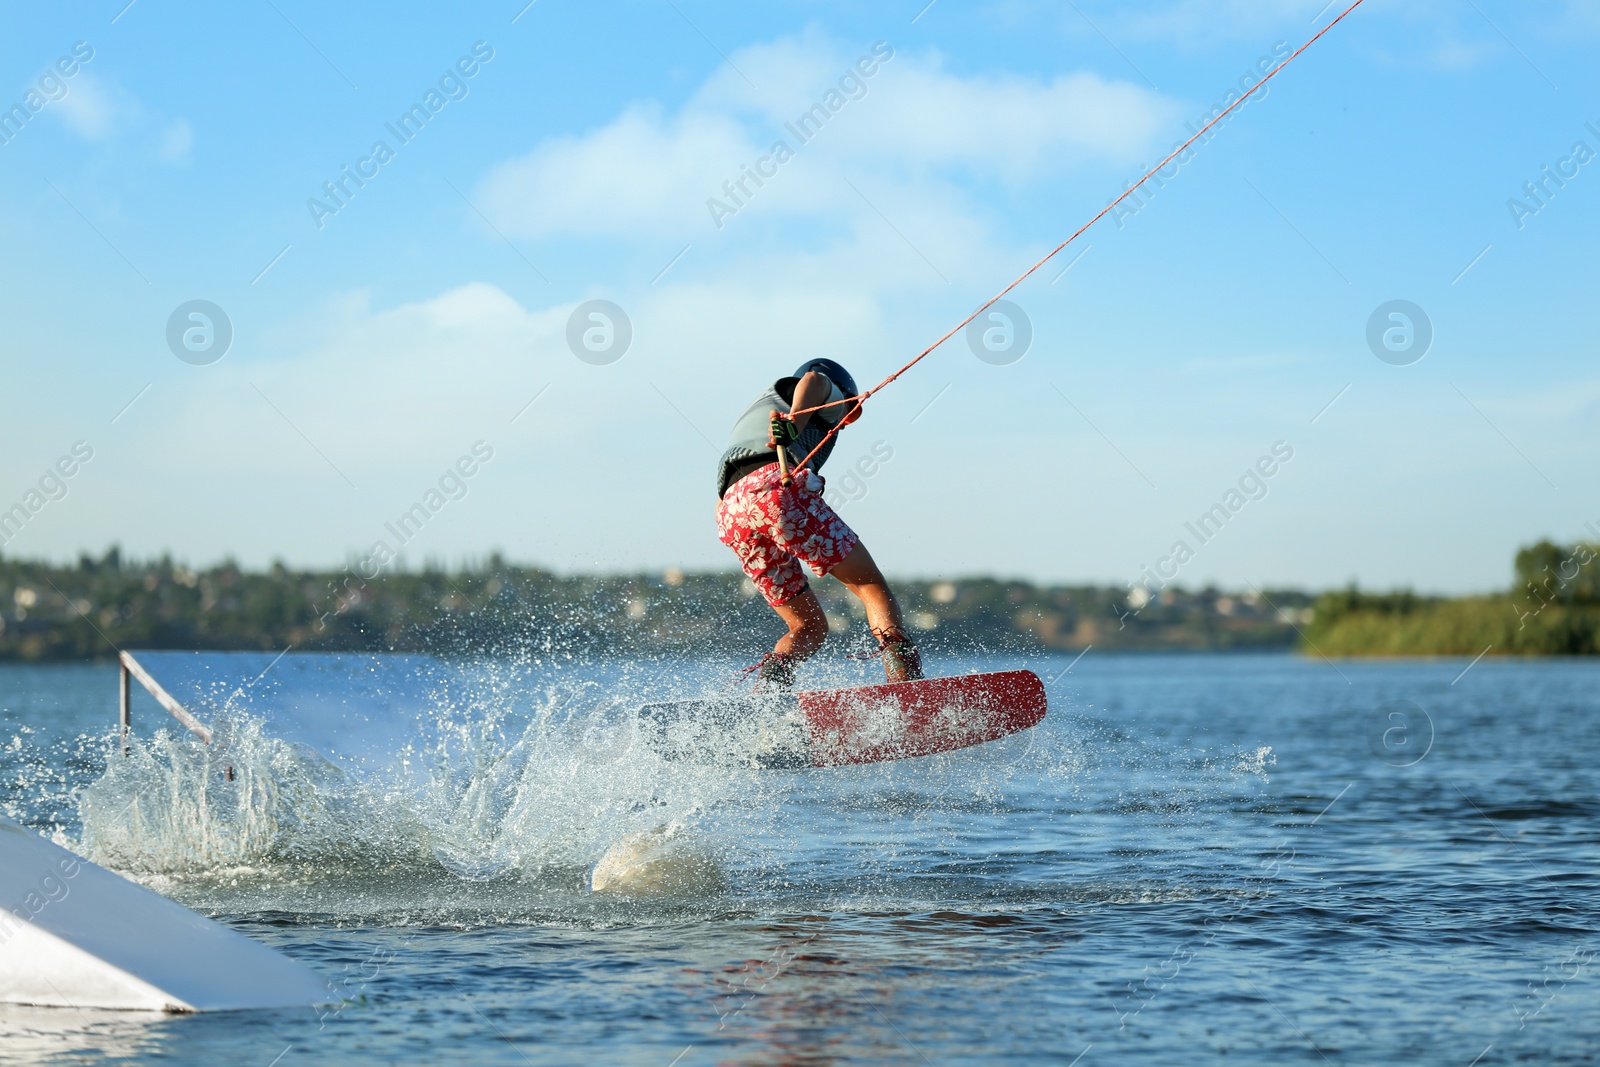 Photo of Teenage wakeboard doing trick on river. Extreme water sport